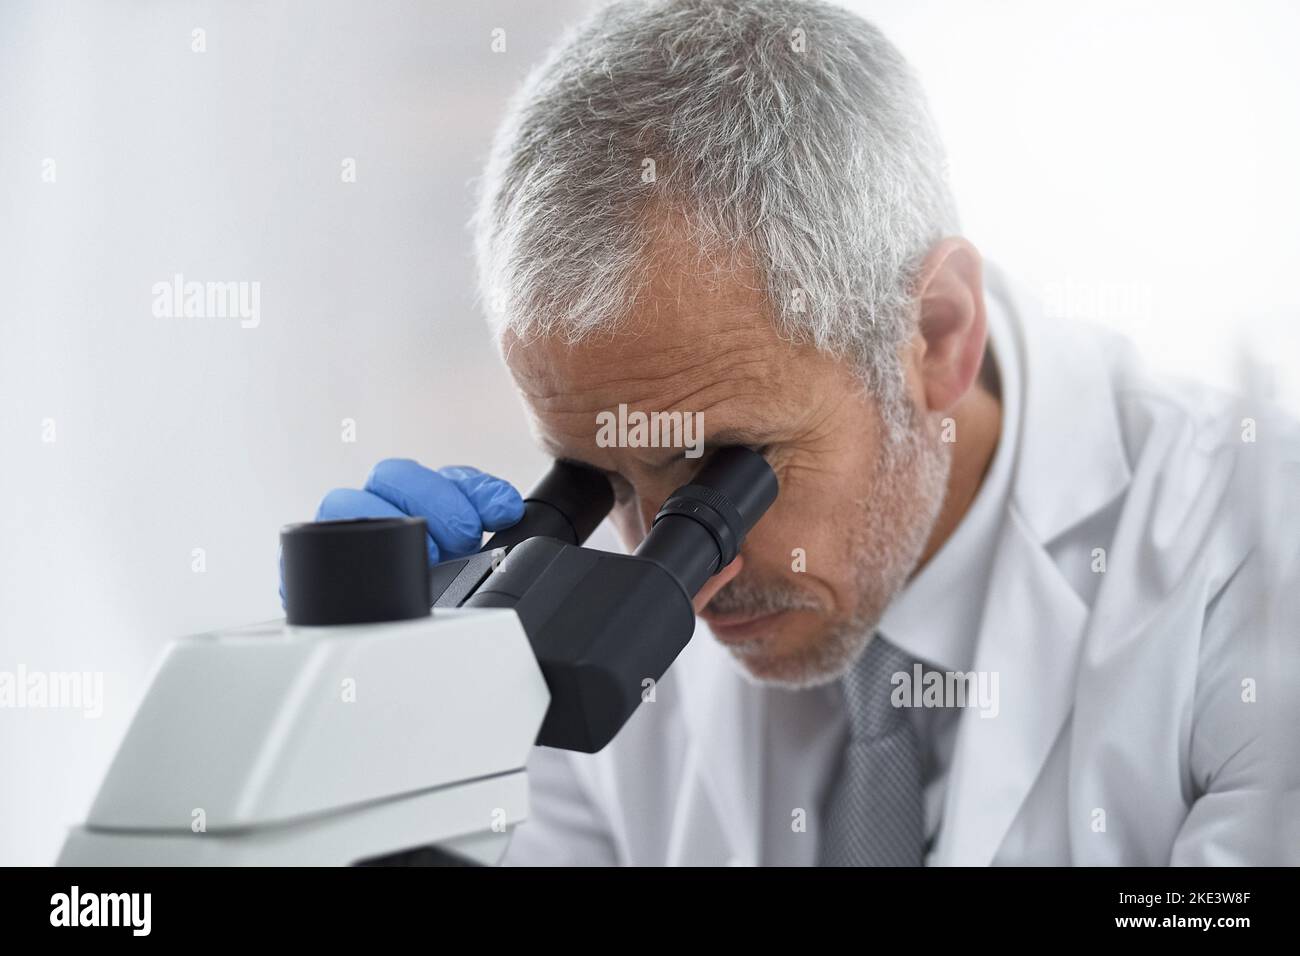 Advancing medicine through research. a researcher at work on a microscope in a lab. Stock Photo